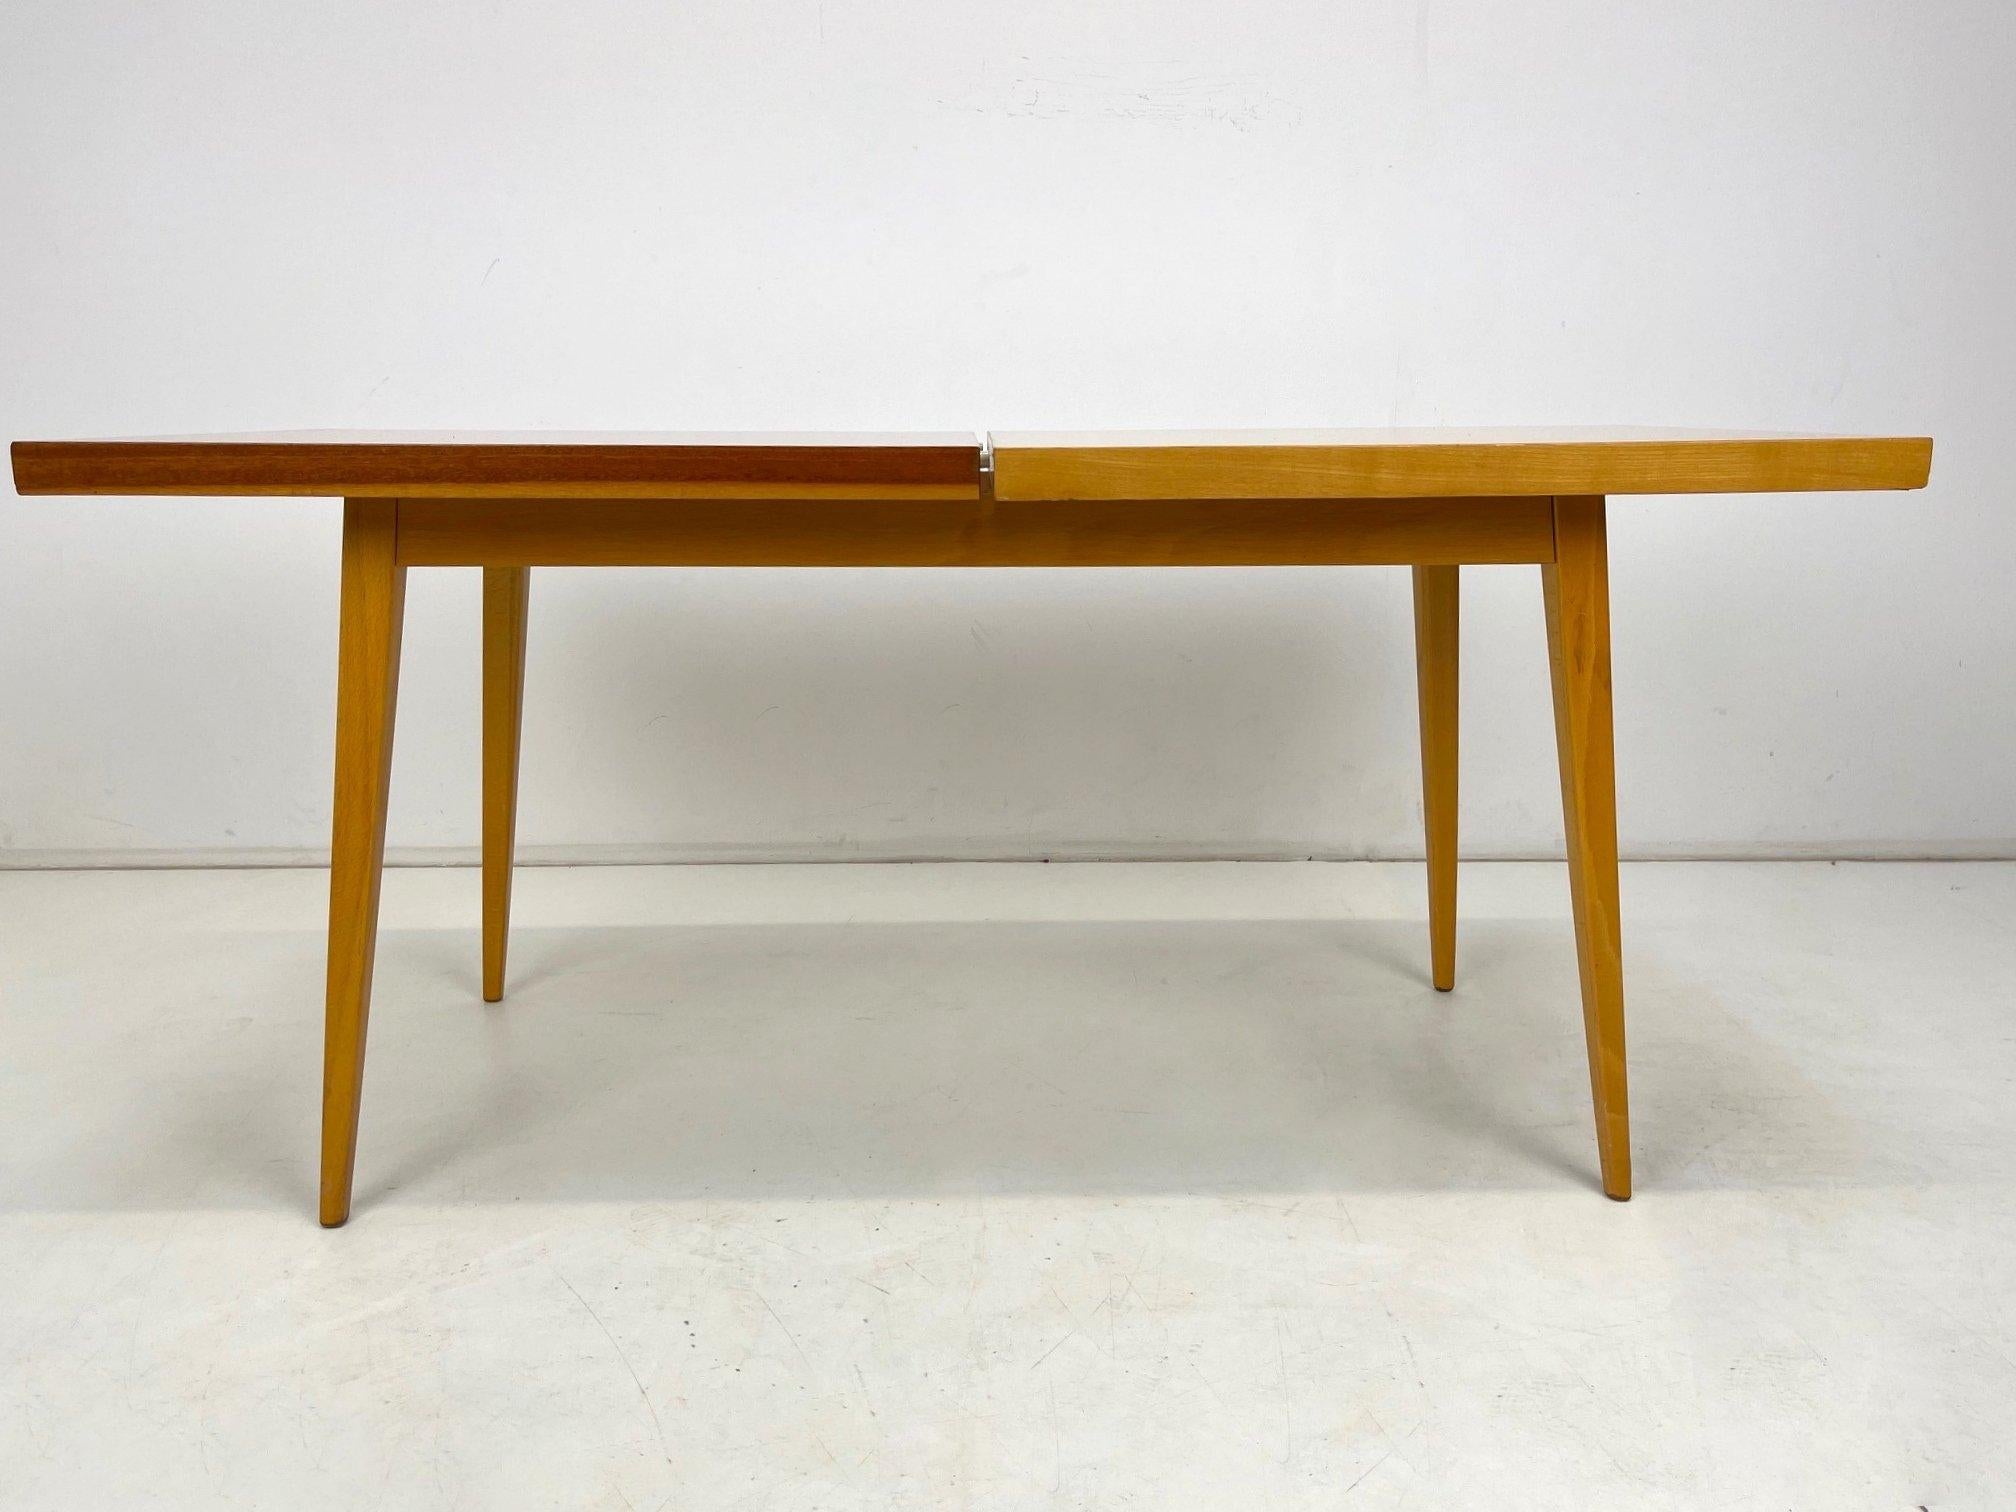 20th Century Vintage Coffee Table in Gloss Finish from Czechoslovakia, 1960's For Sale